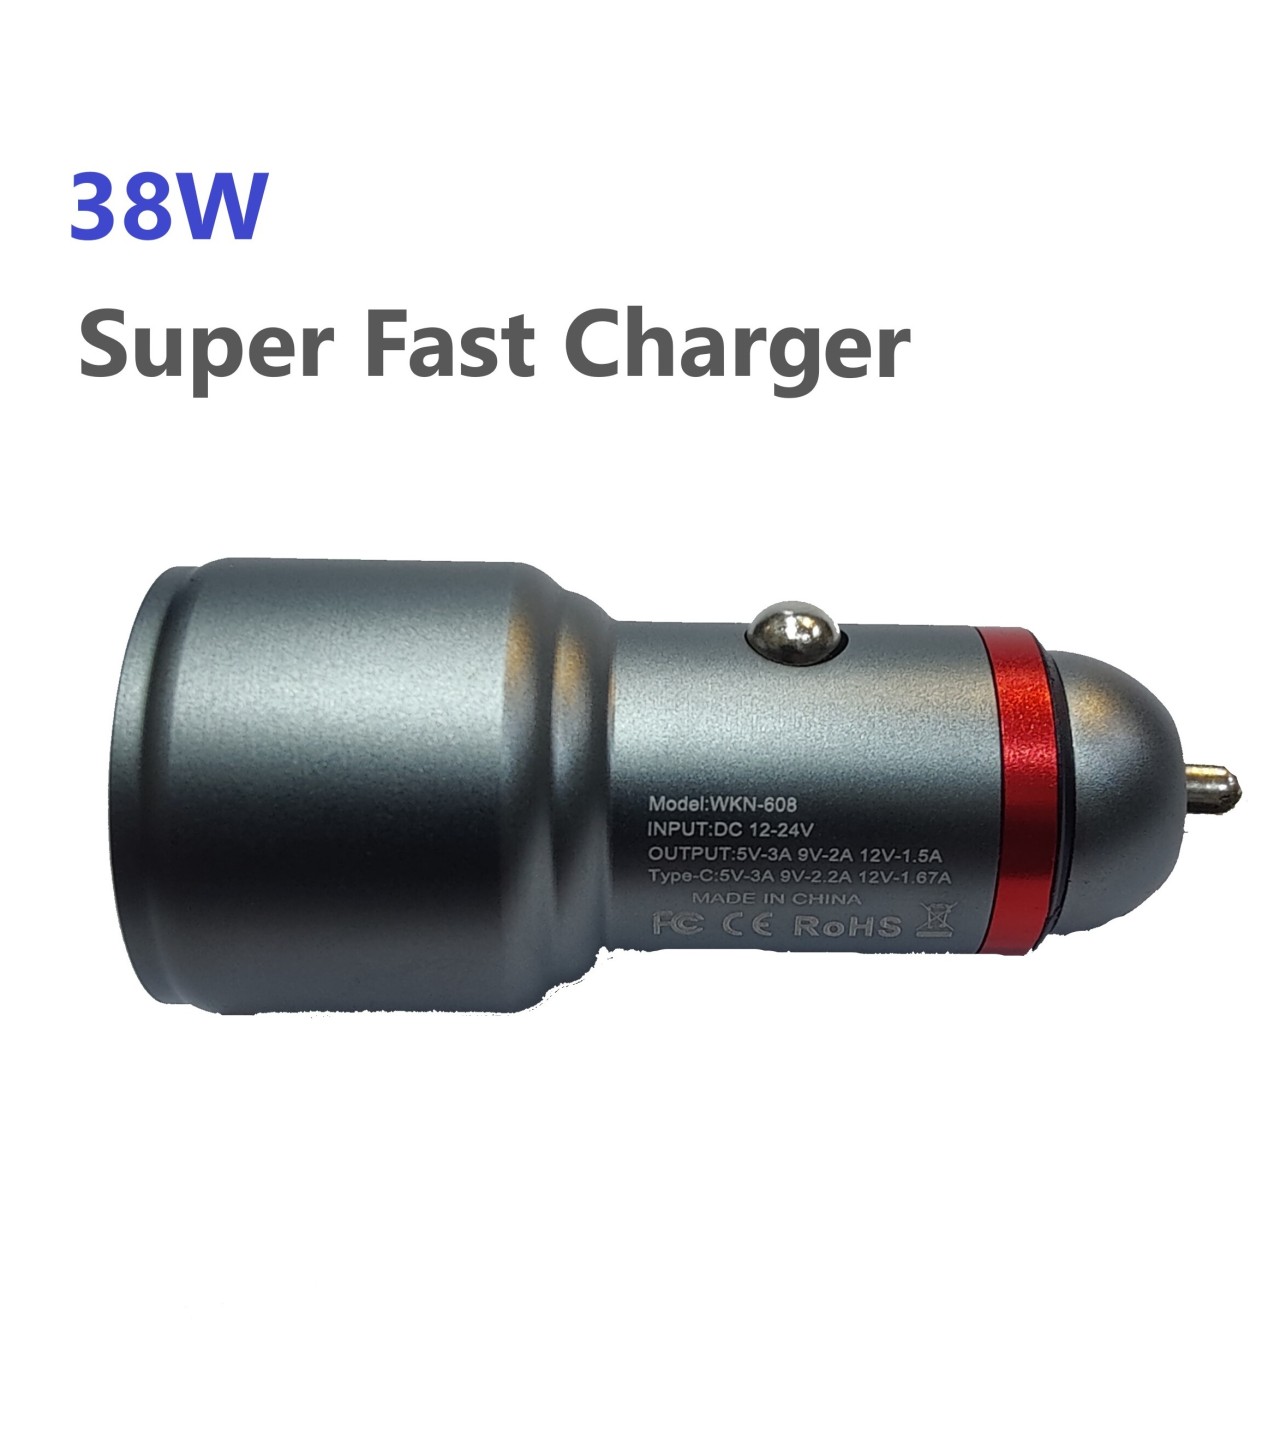 38W PD+ USB Car Charger Adapter Super Fast Charger